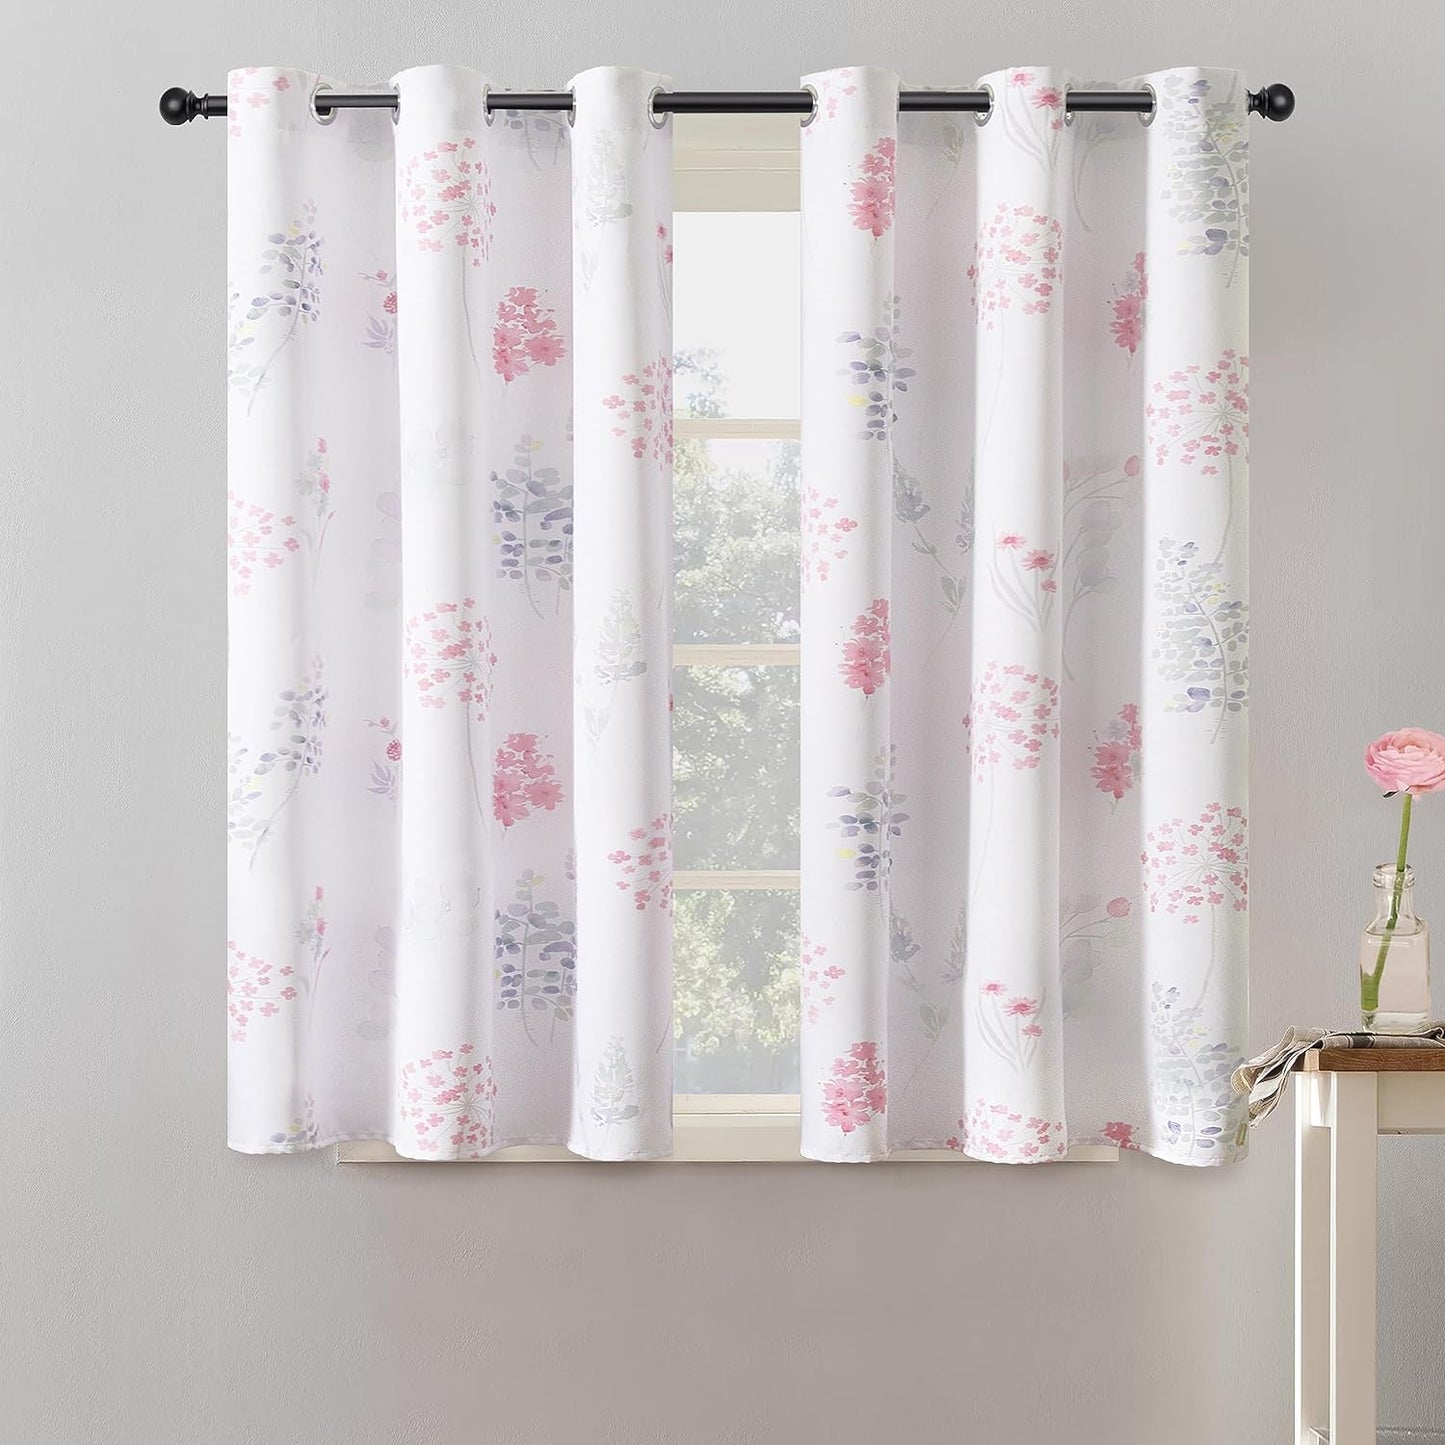 XTMYI 63 Inch Length Sage Green Window Curtains for Bedroom 2 Panels,Room Darkening Watercolor Floral Leaves 80% Blackout Flowered Printed Curtains for Living Room with Grommet,1 Pair Set  XTMYI Pink  Green 34"X45" 